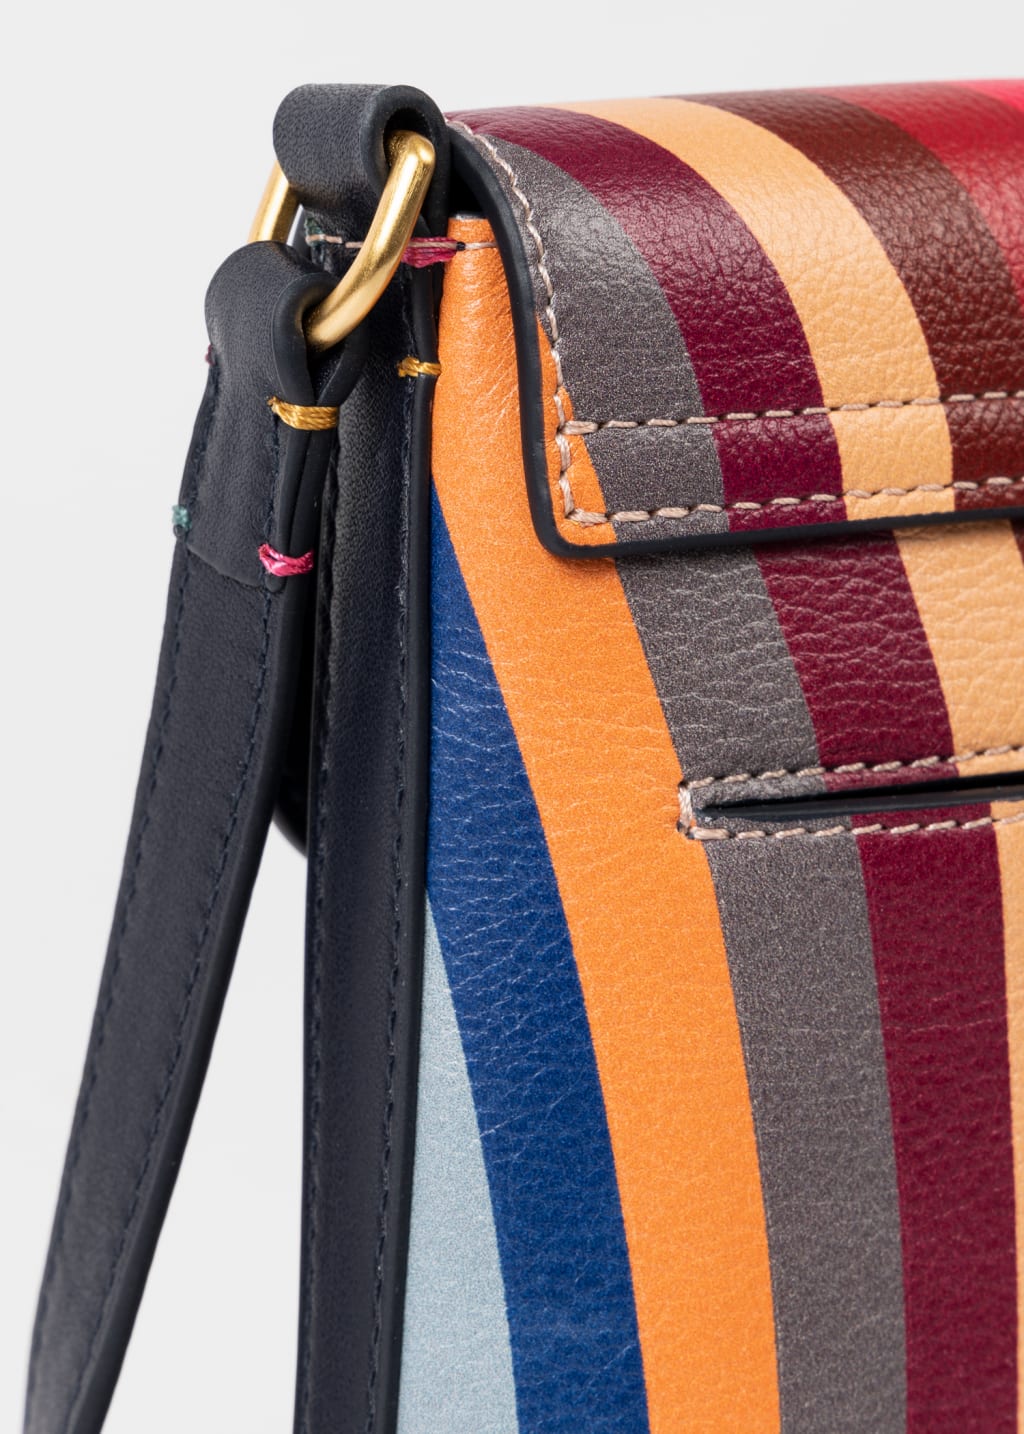 Product View - Women's Leather 'Swirl' Phone Pouch by Paul Smith